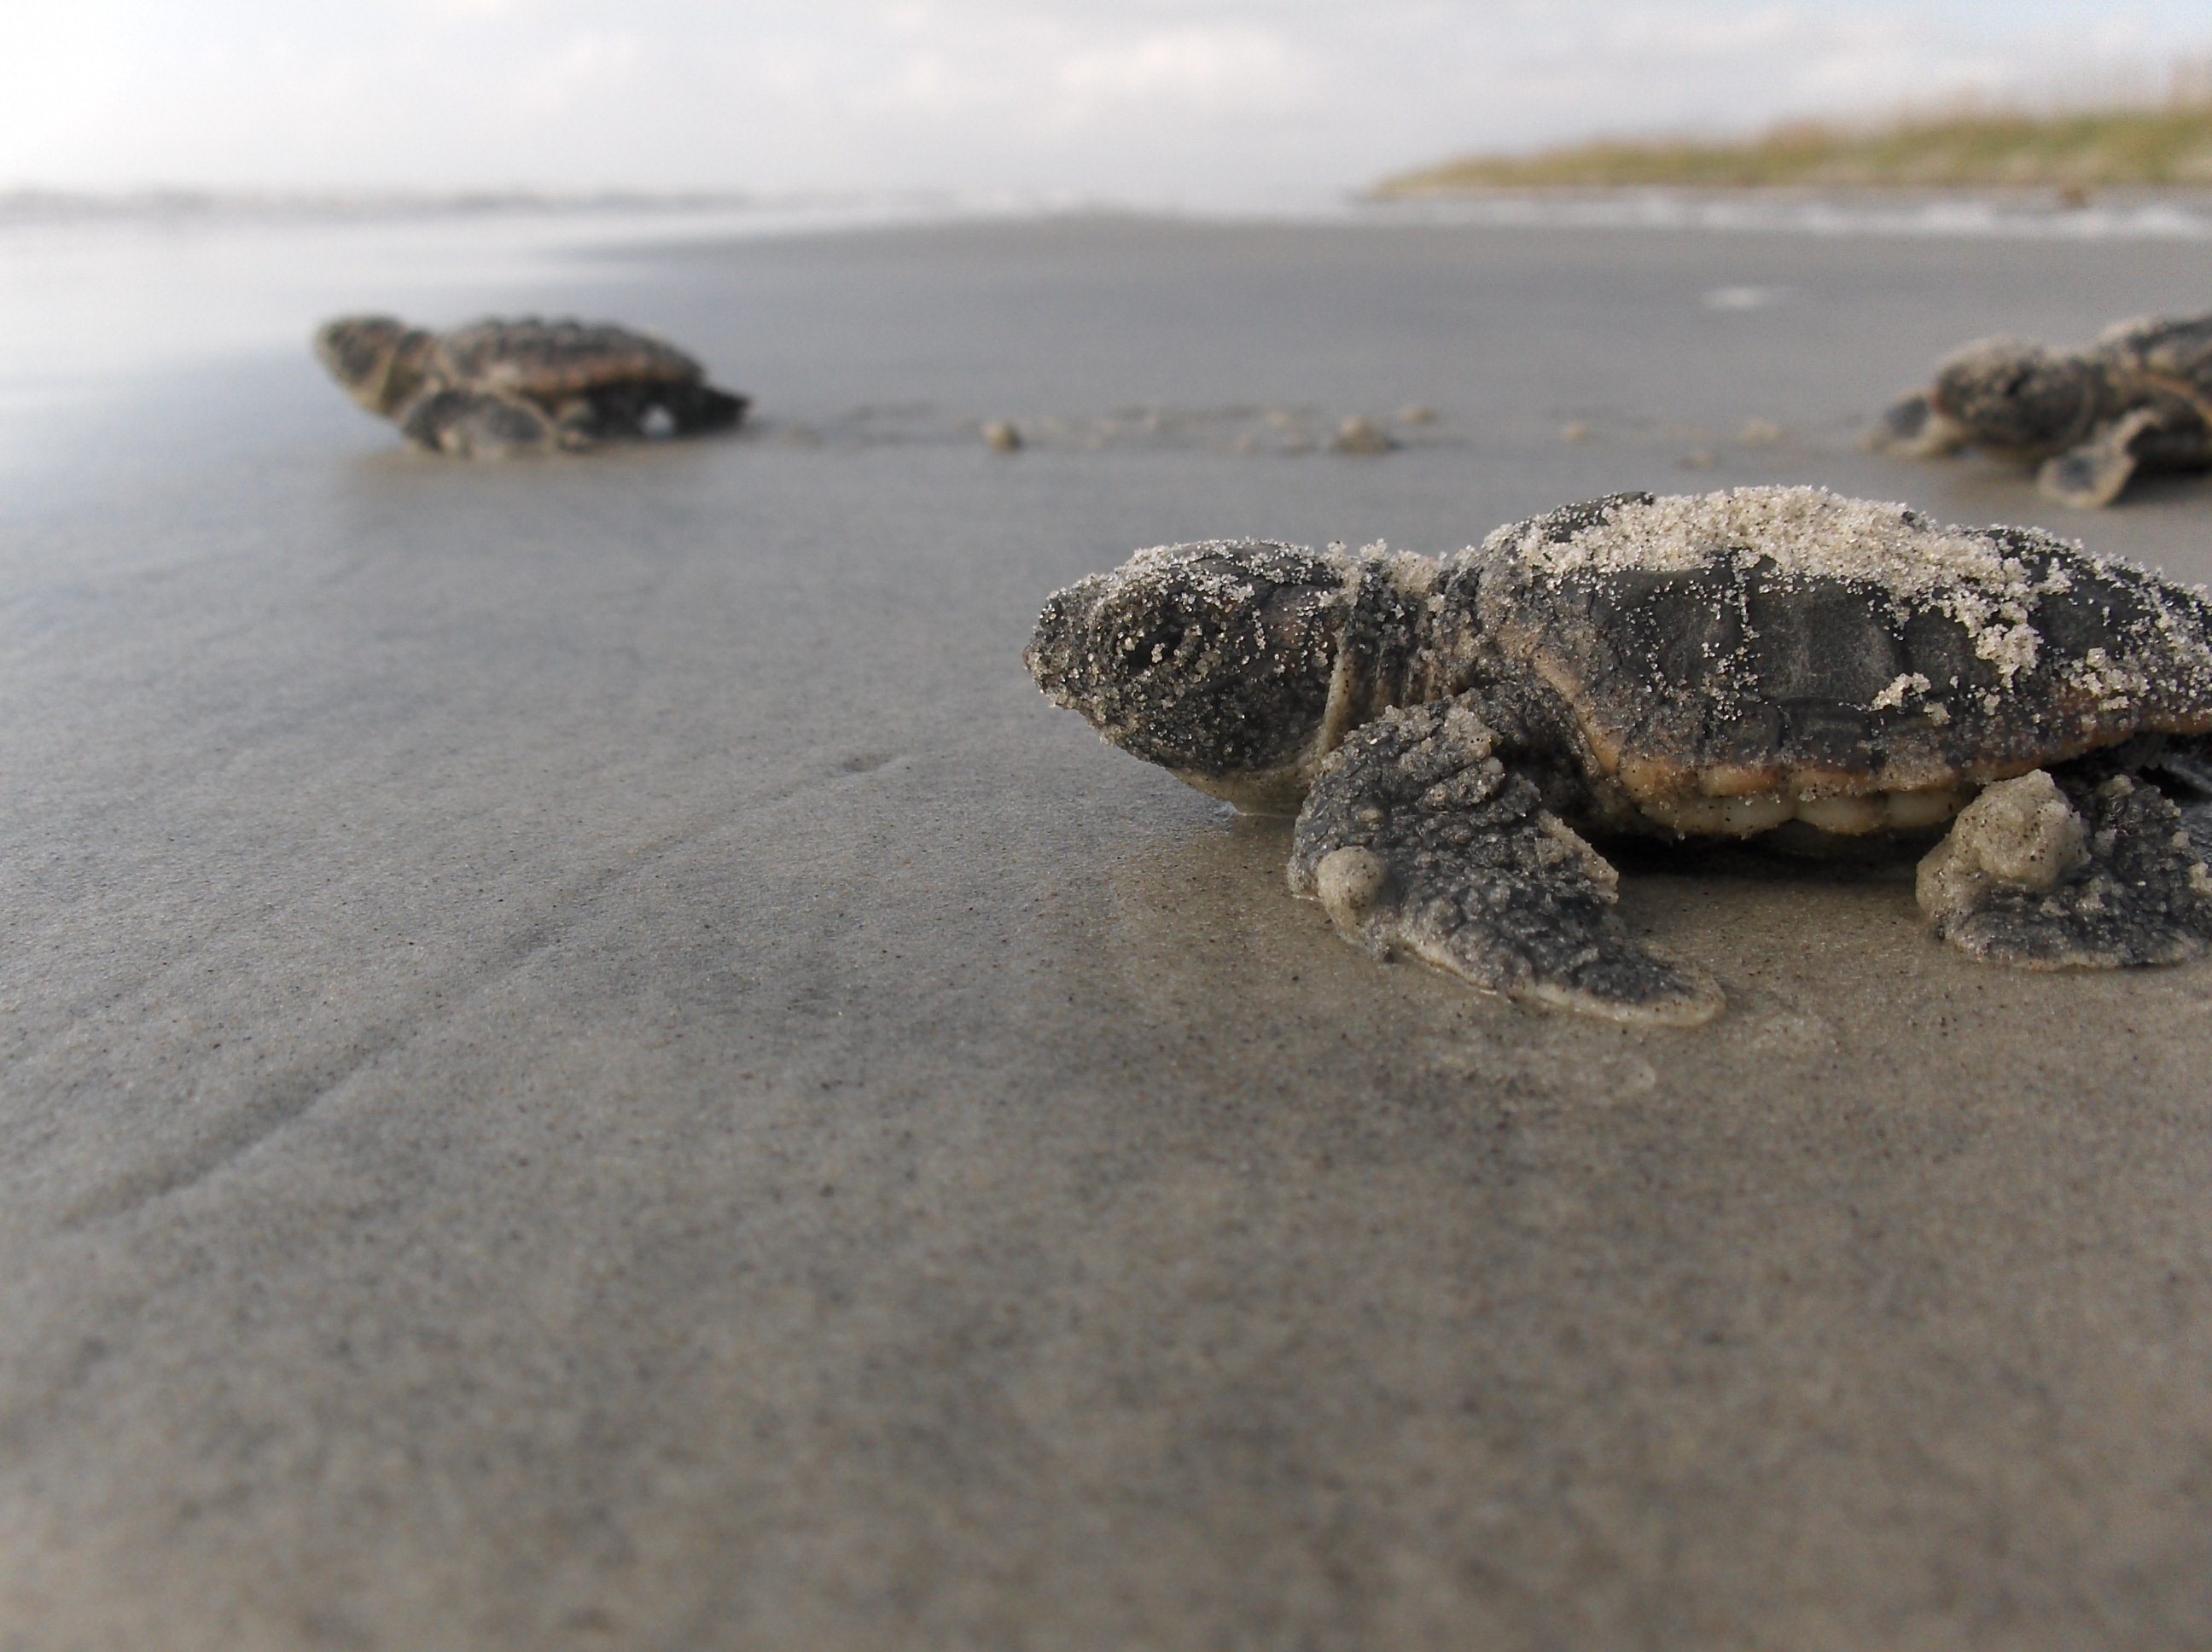 A hatchling loggerhead sea turtle makes its way to the ocean in this DNR file photo.